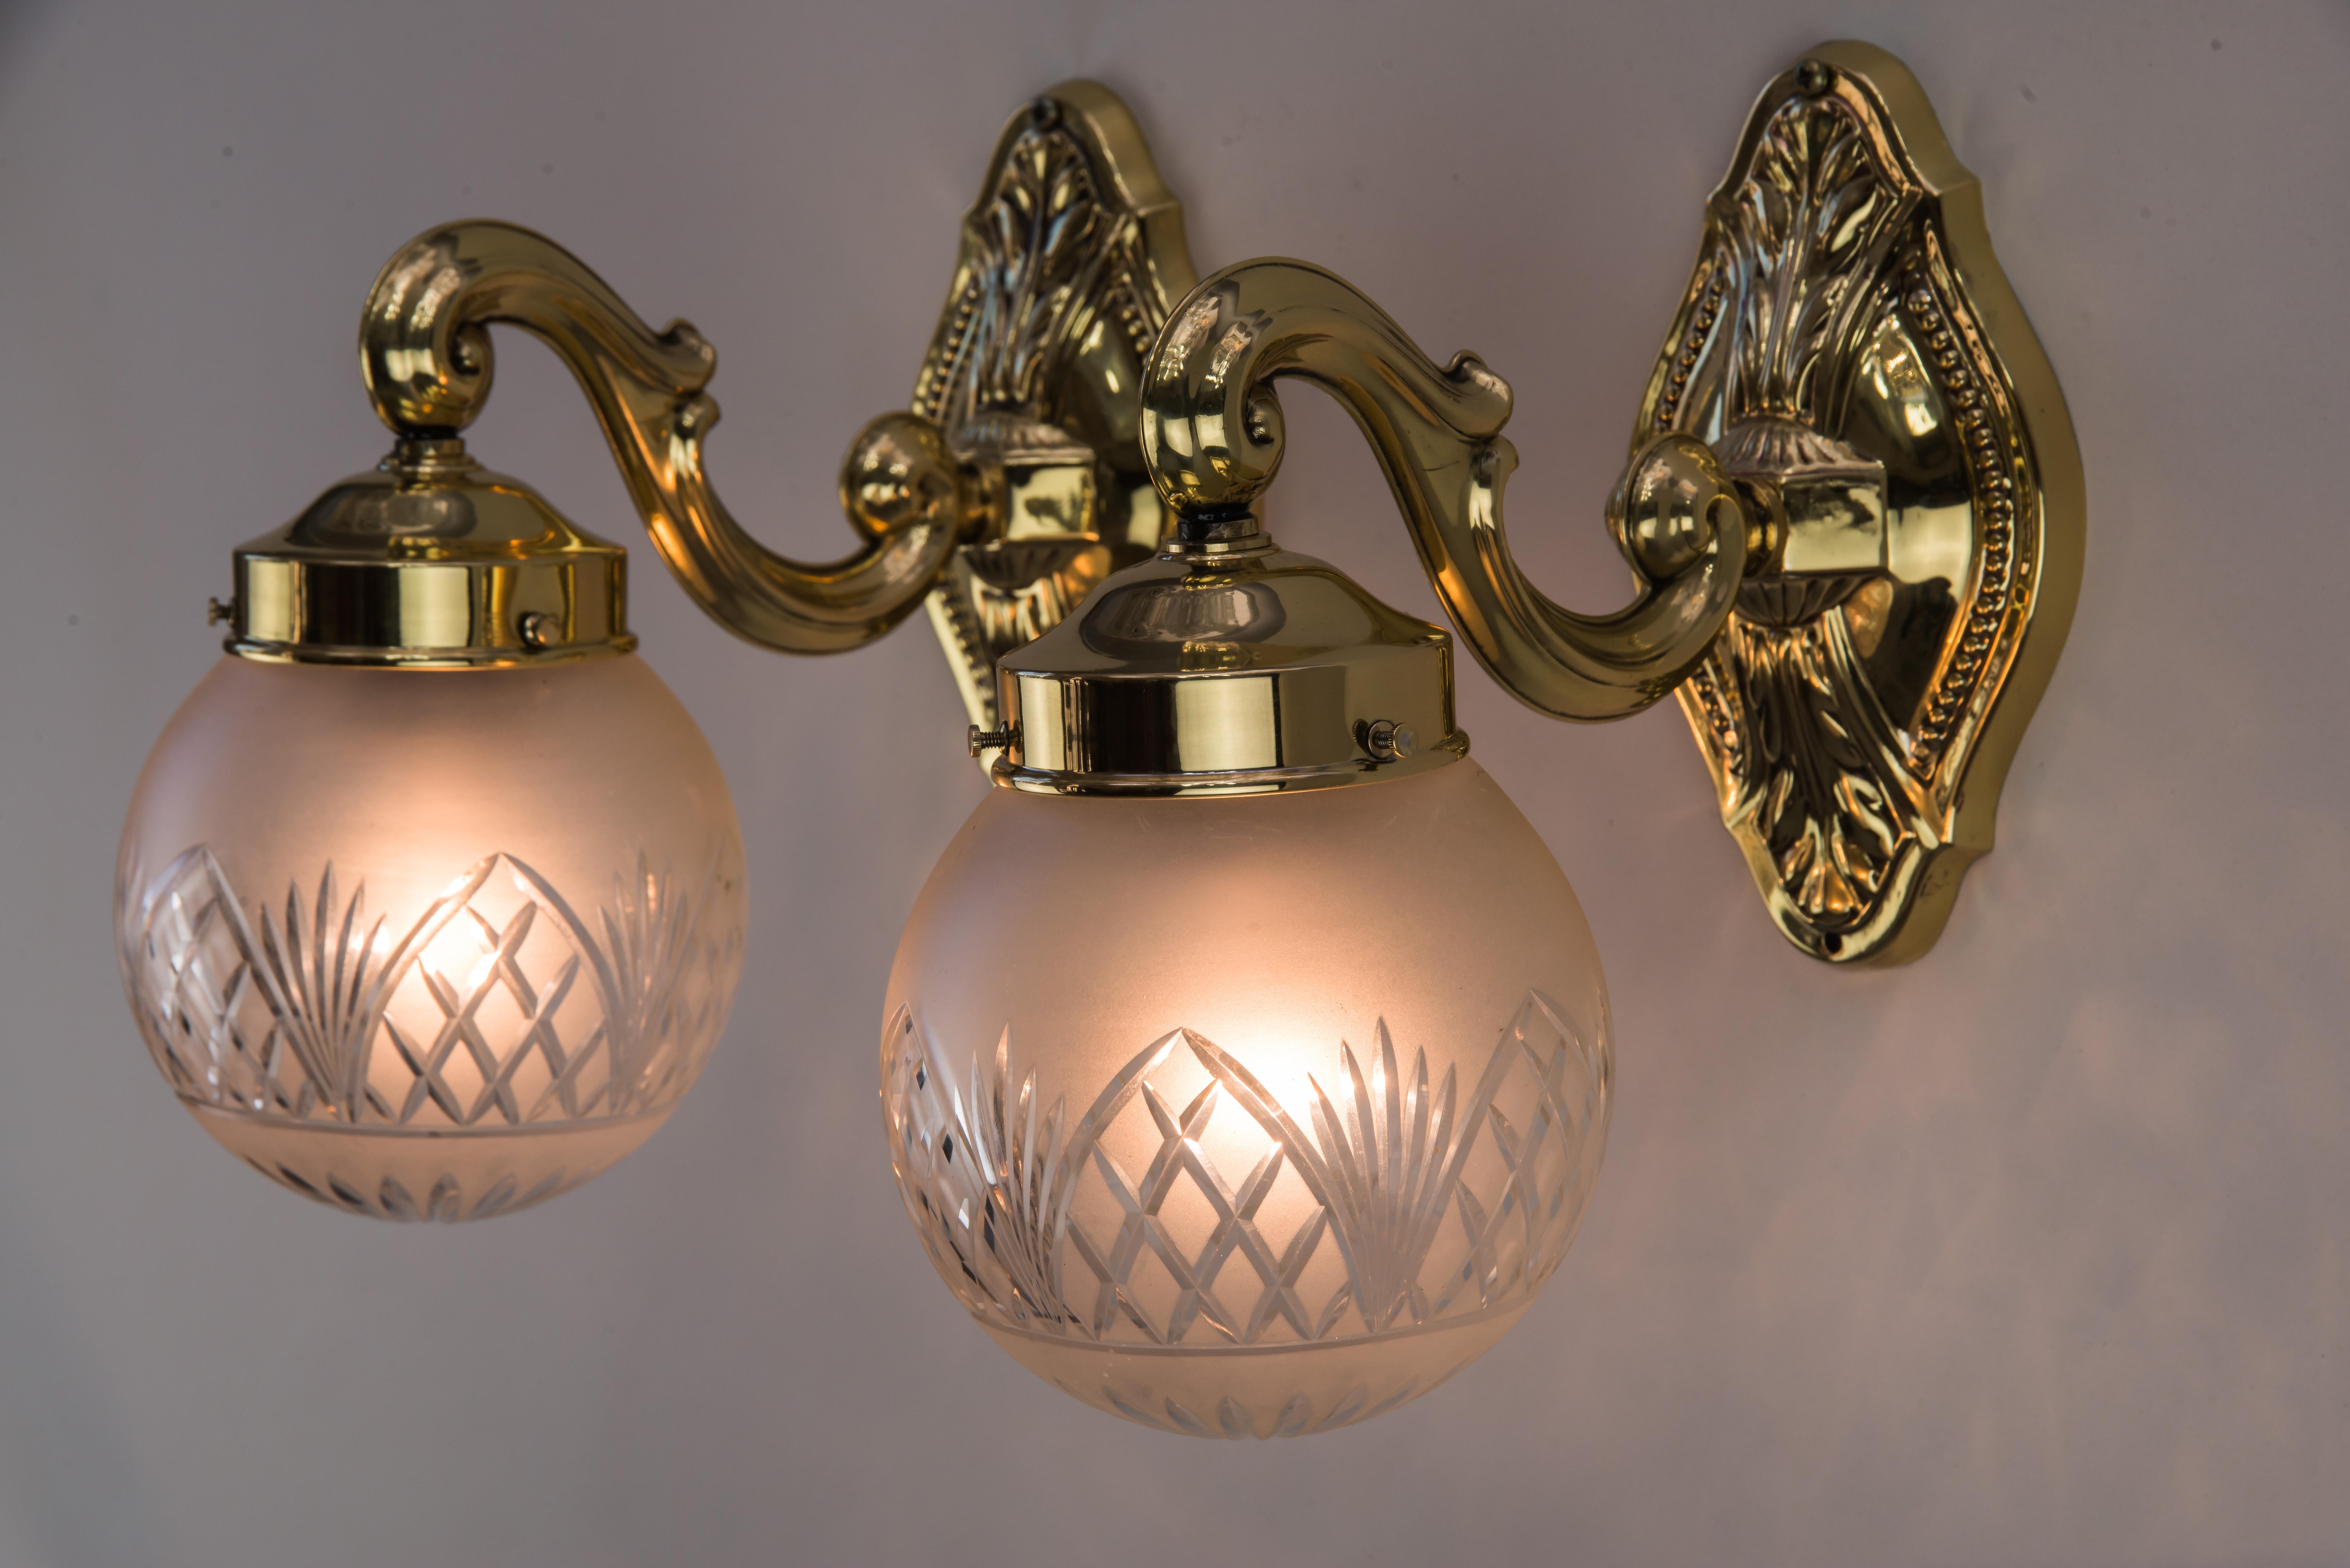 Two Historistic Wall sconces around 1890s with original cut glass shades
Polished and stove enamelled